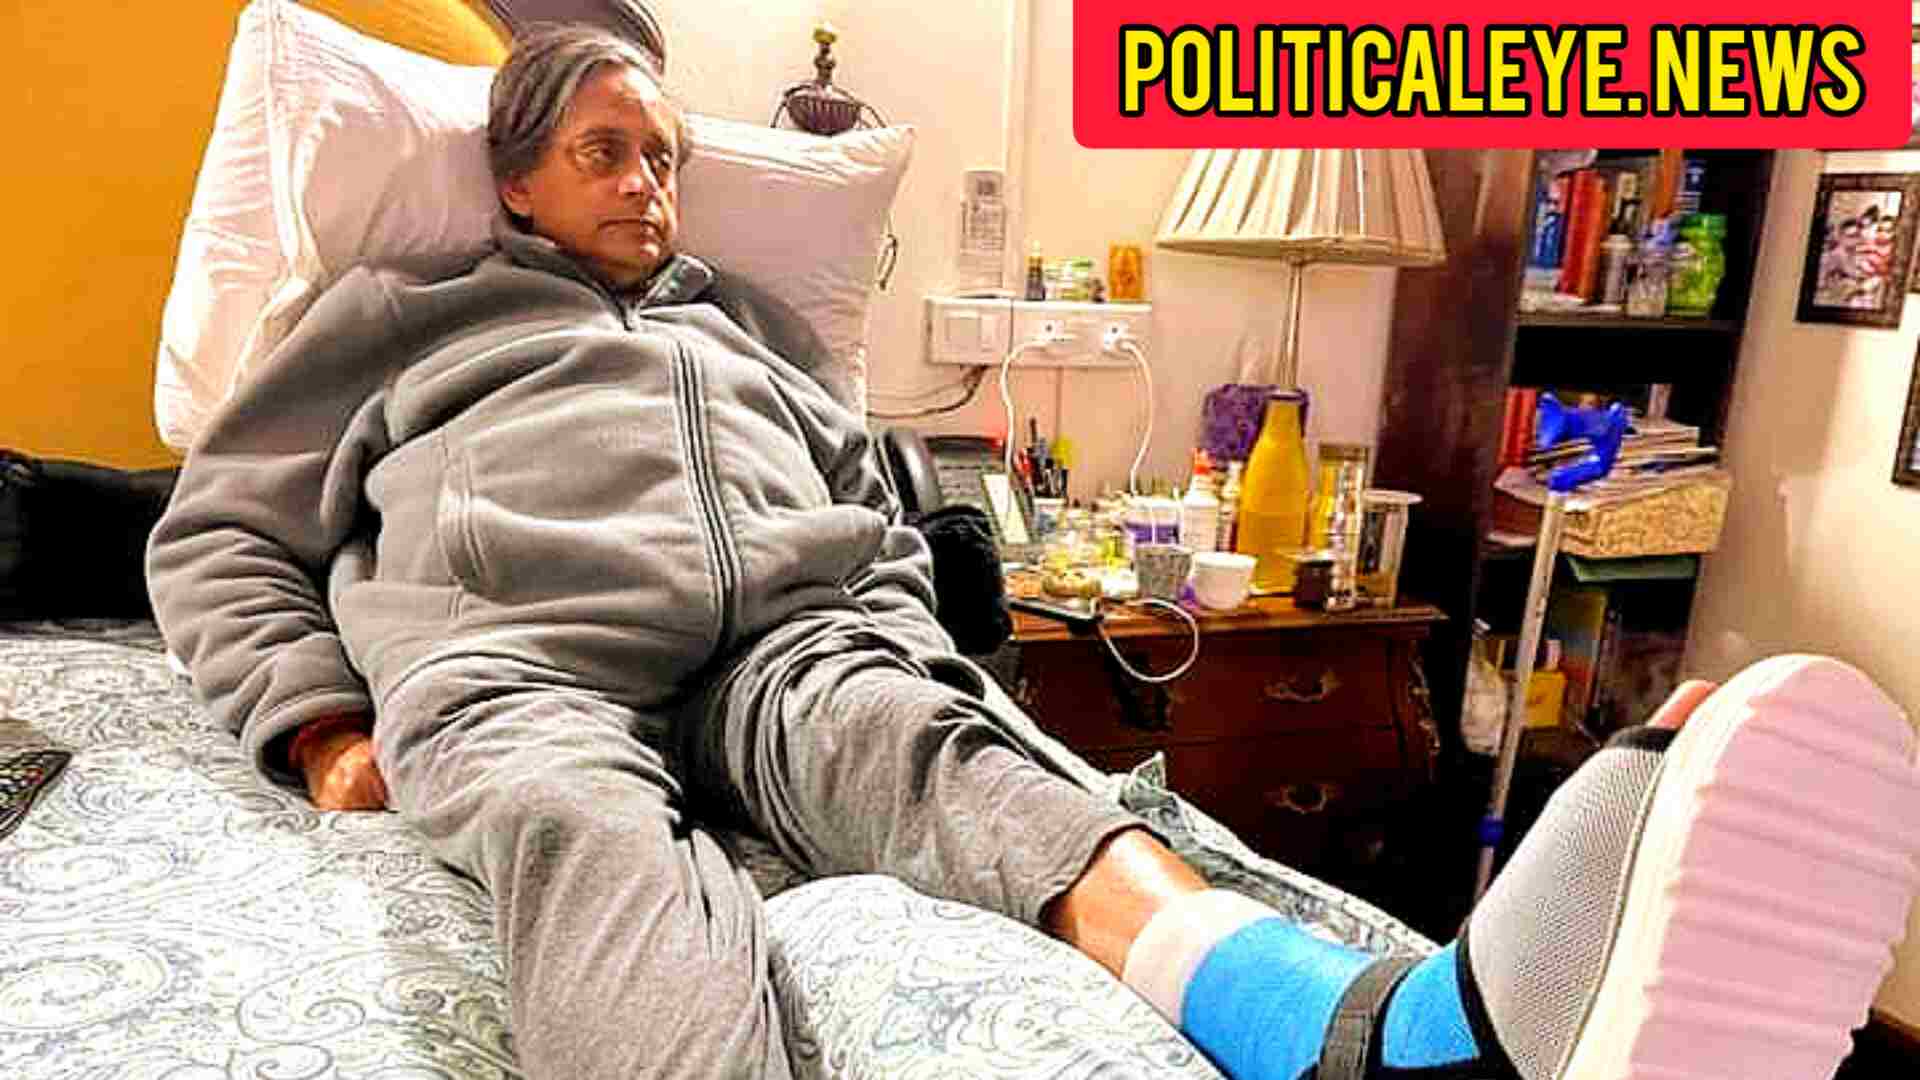 Shashi Tharoor MP injured after falling in Parliament; #congresMPshashiTharoor, #DrShashiTharoor, #ThiruvanthapuramMPshashiTharoor,